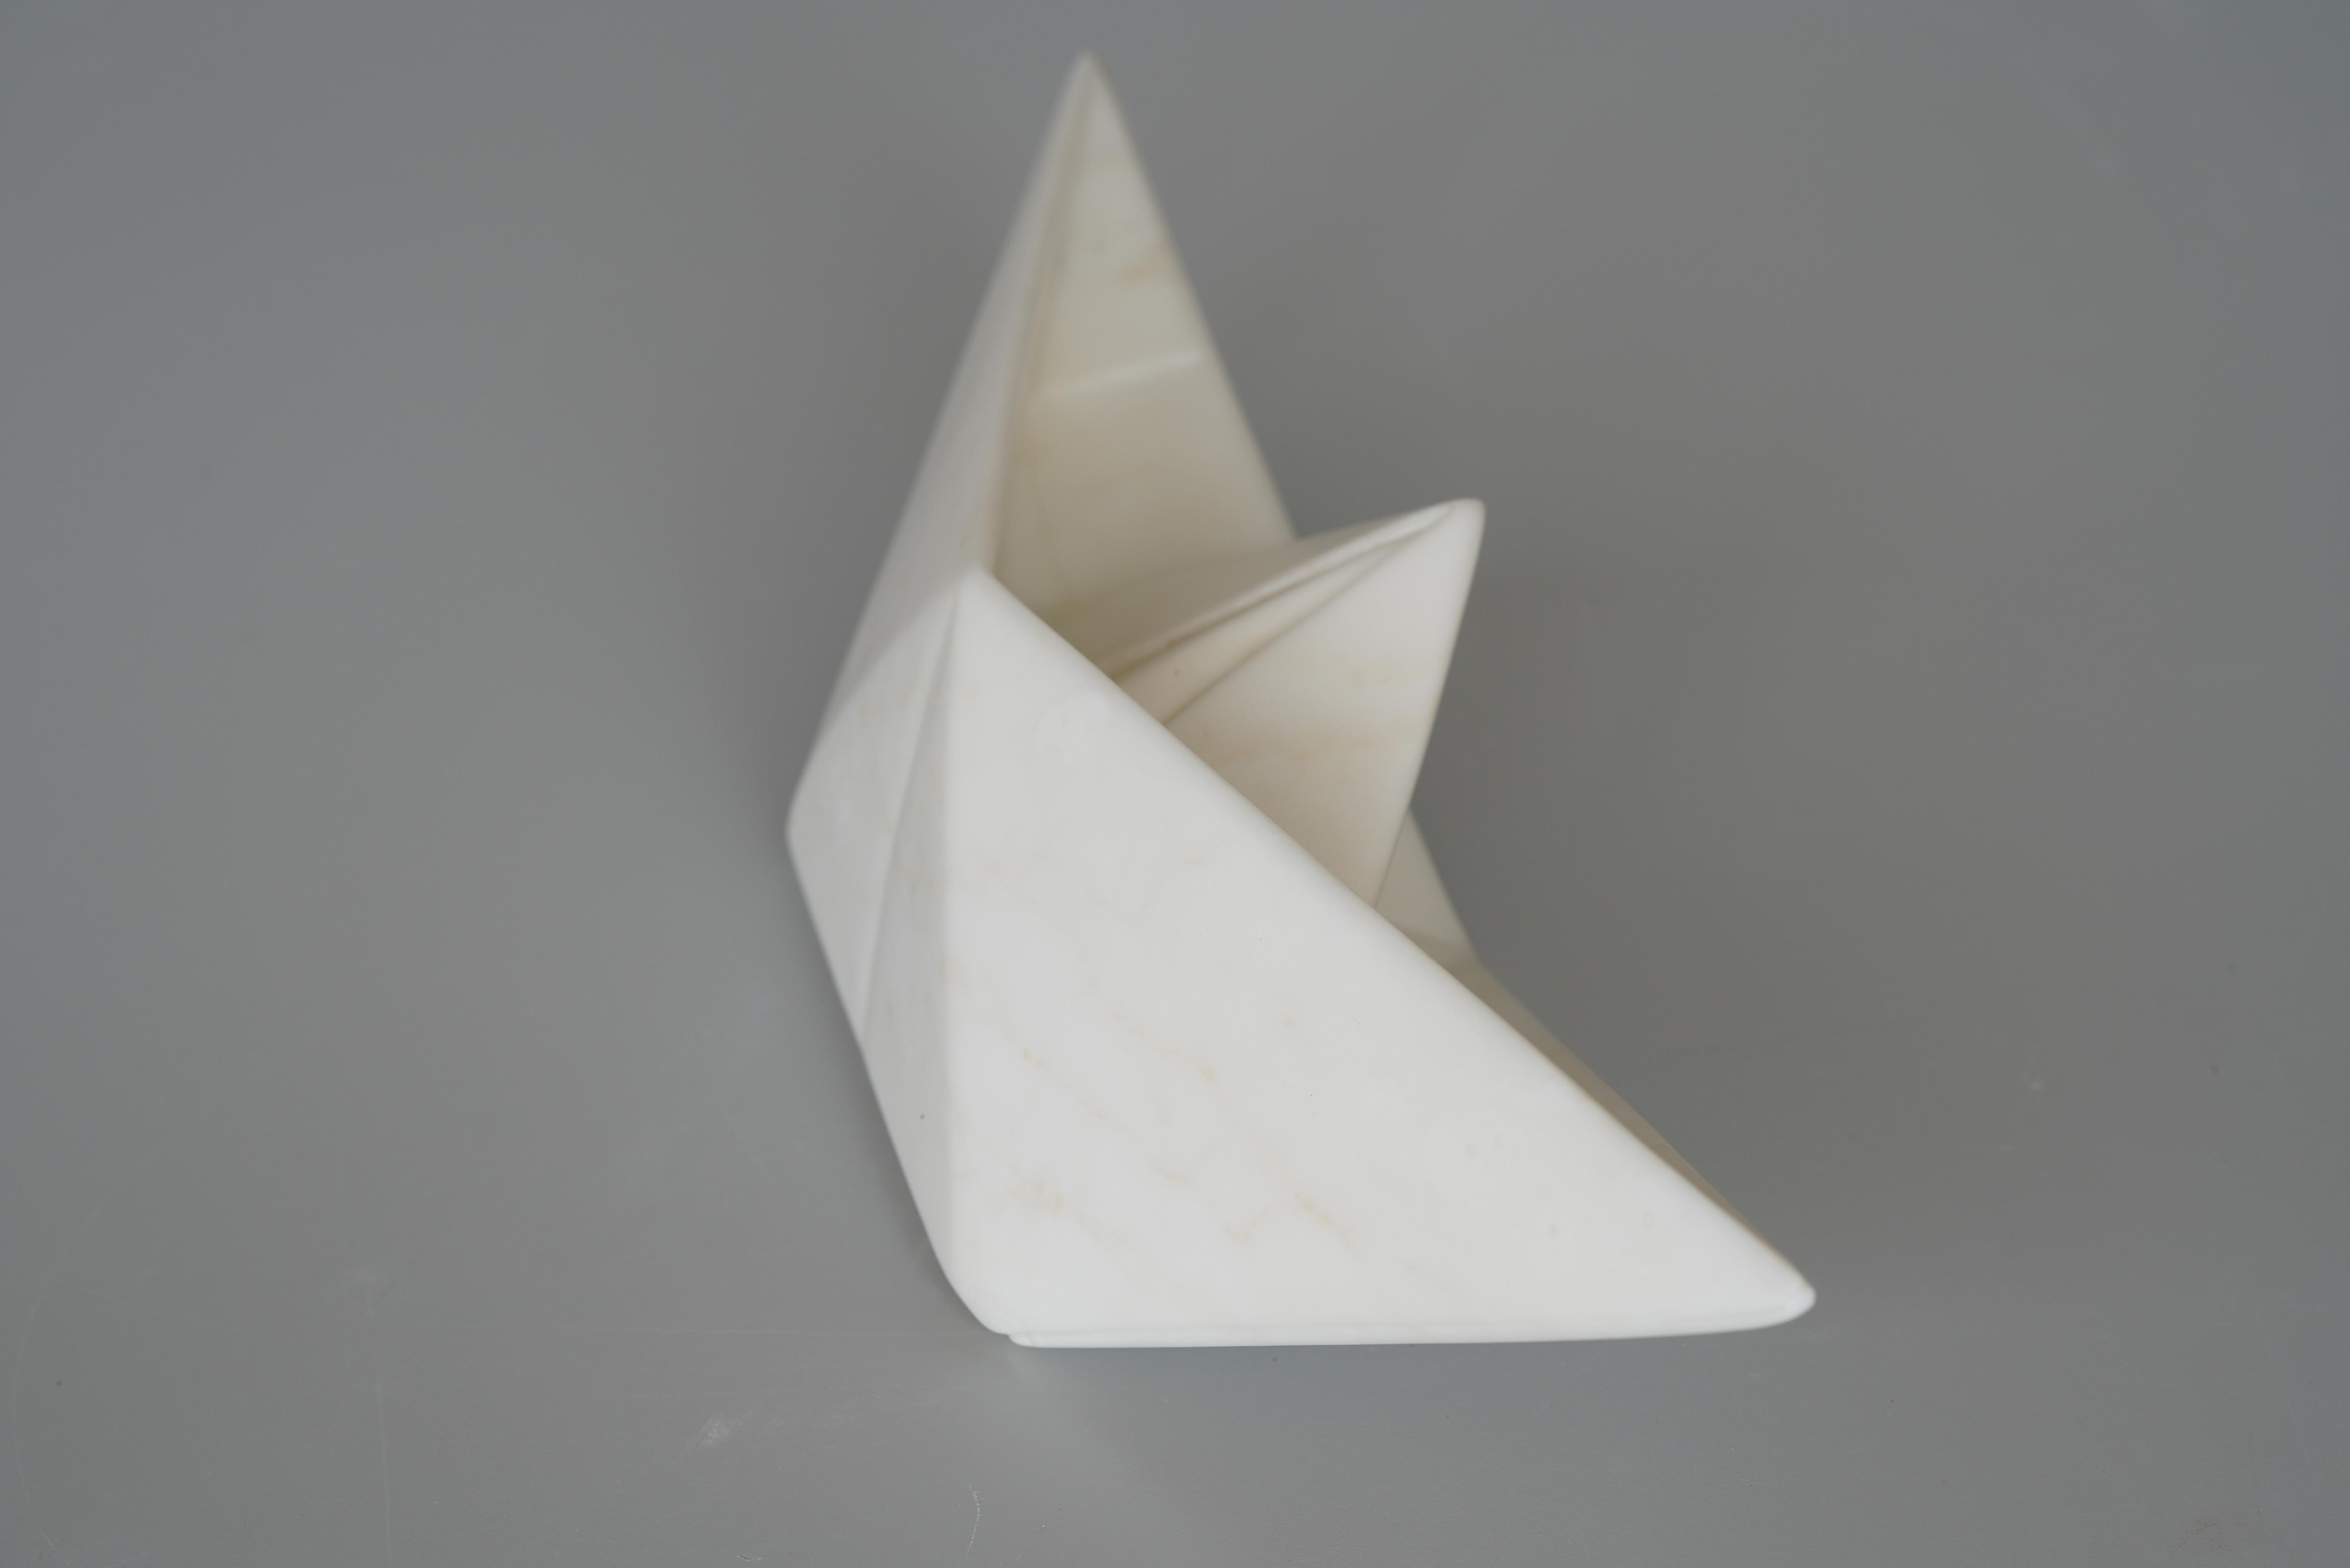 Paper boat - Contemporary Sculpture by John Bizas